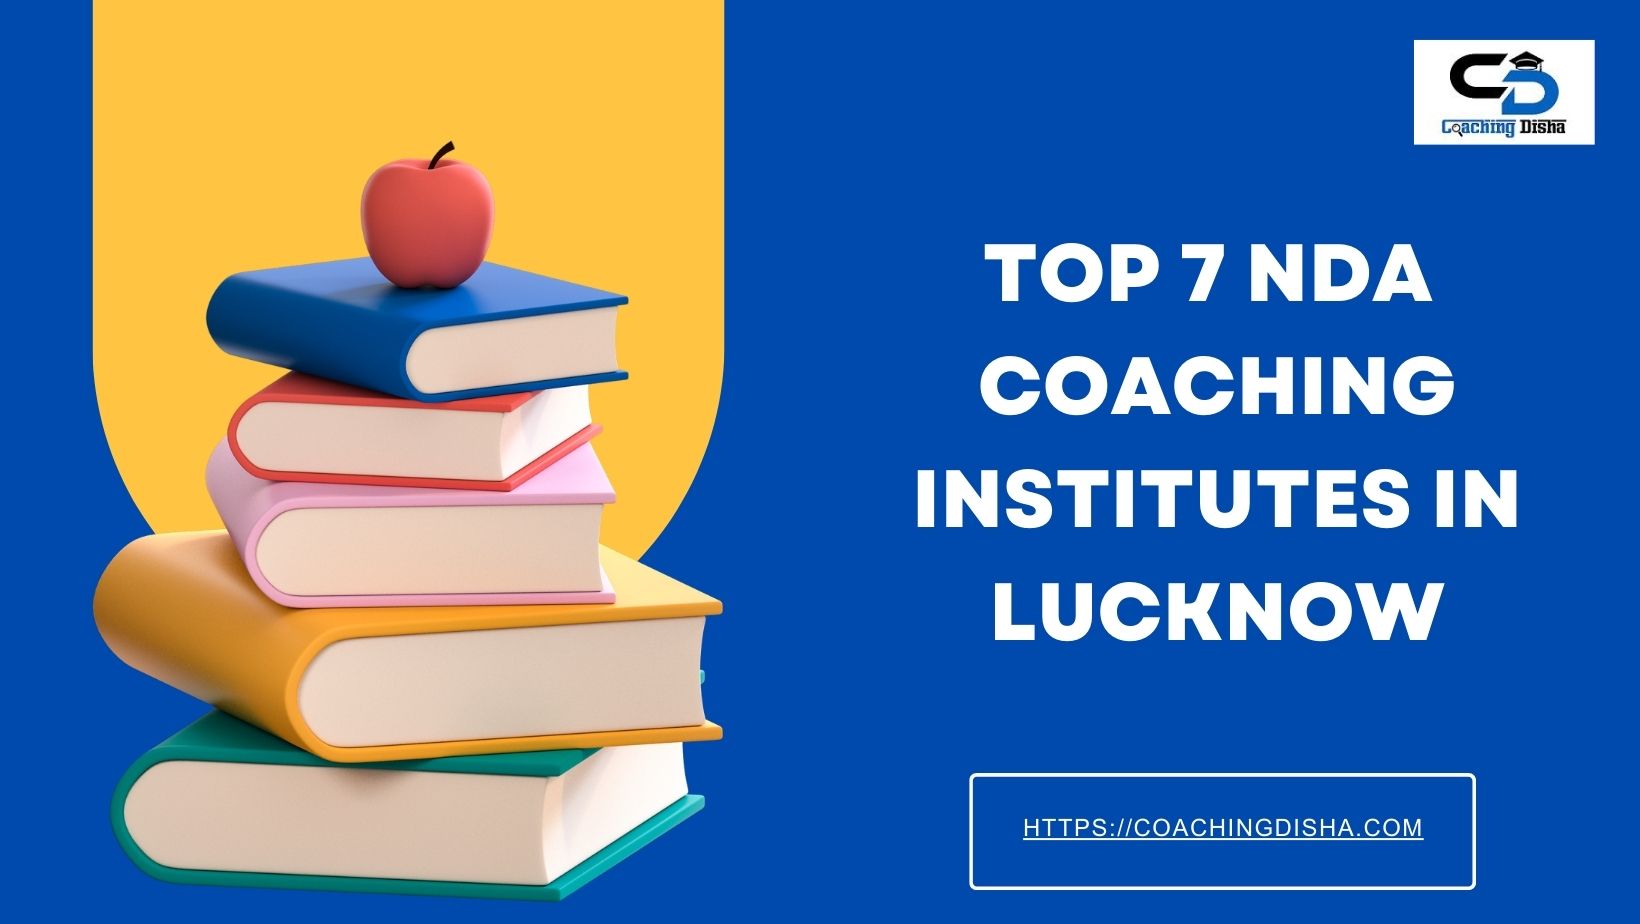 Top 7 NDA Coaching Institutes in Lucknow: Fees, Contact Details